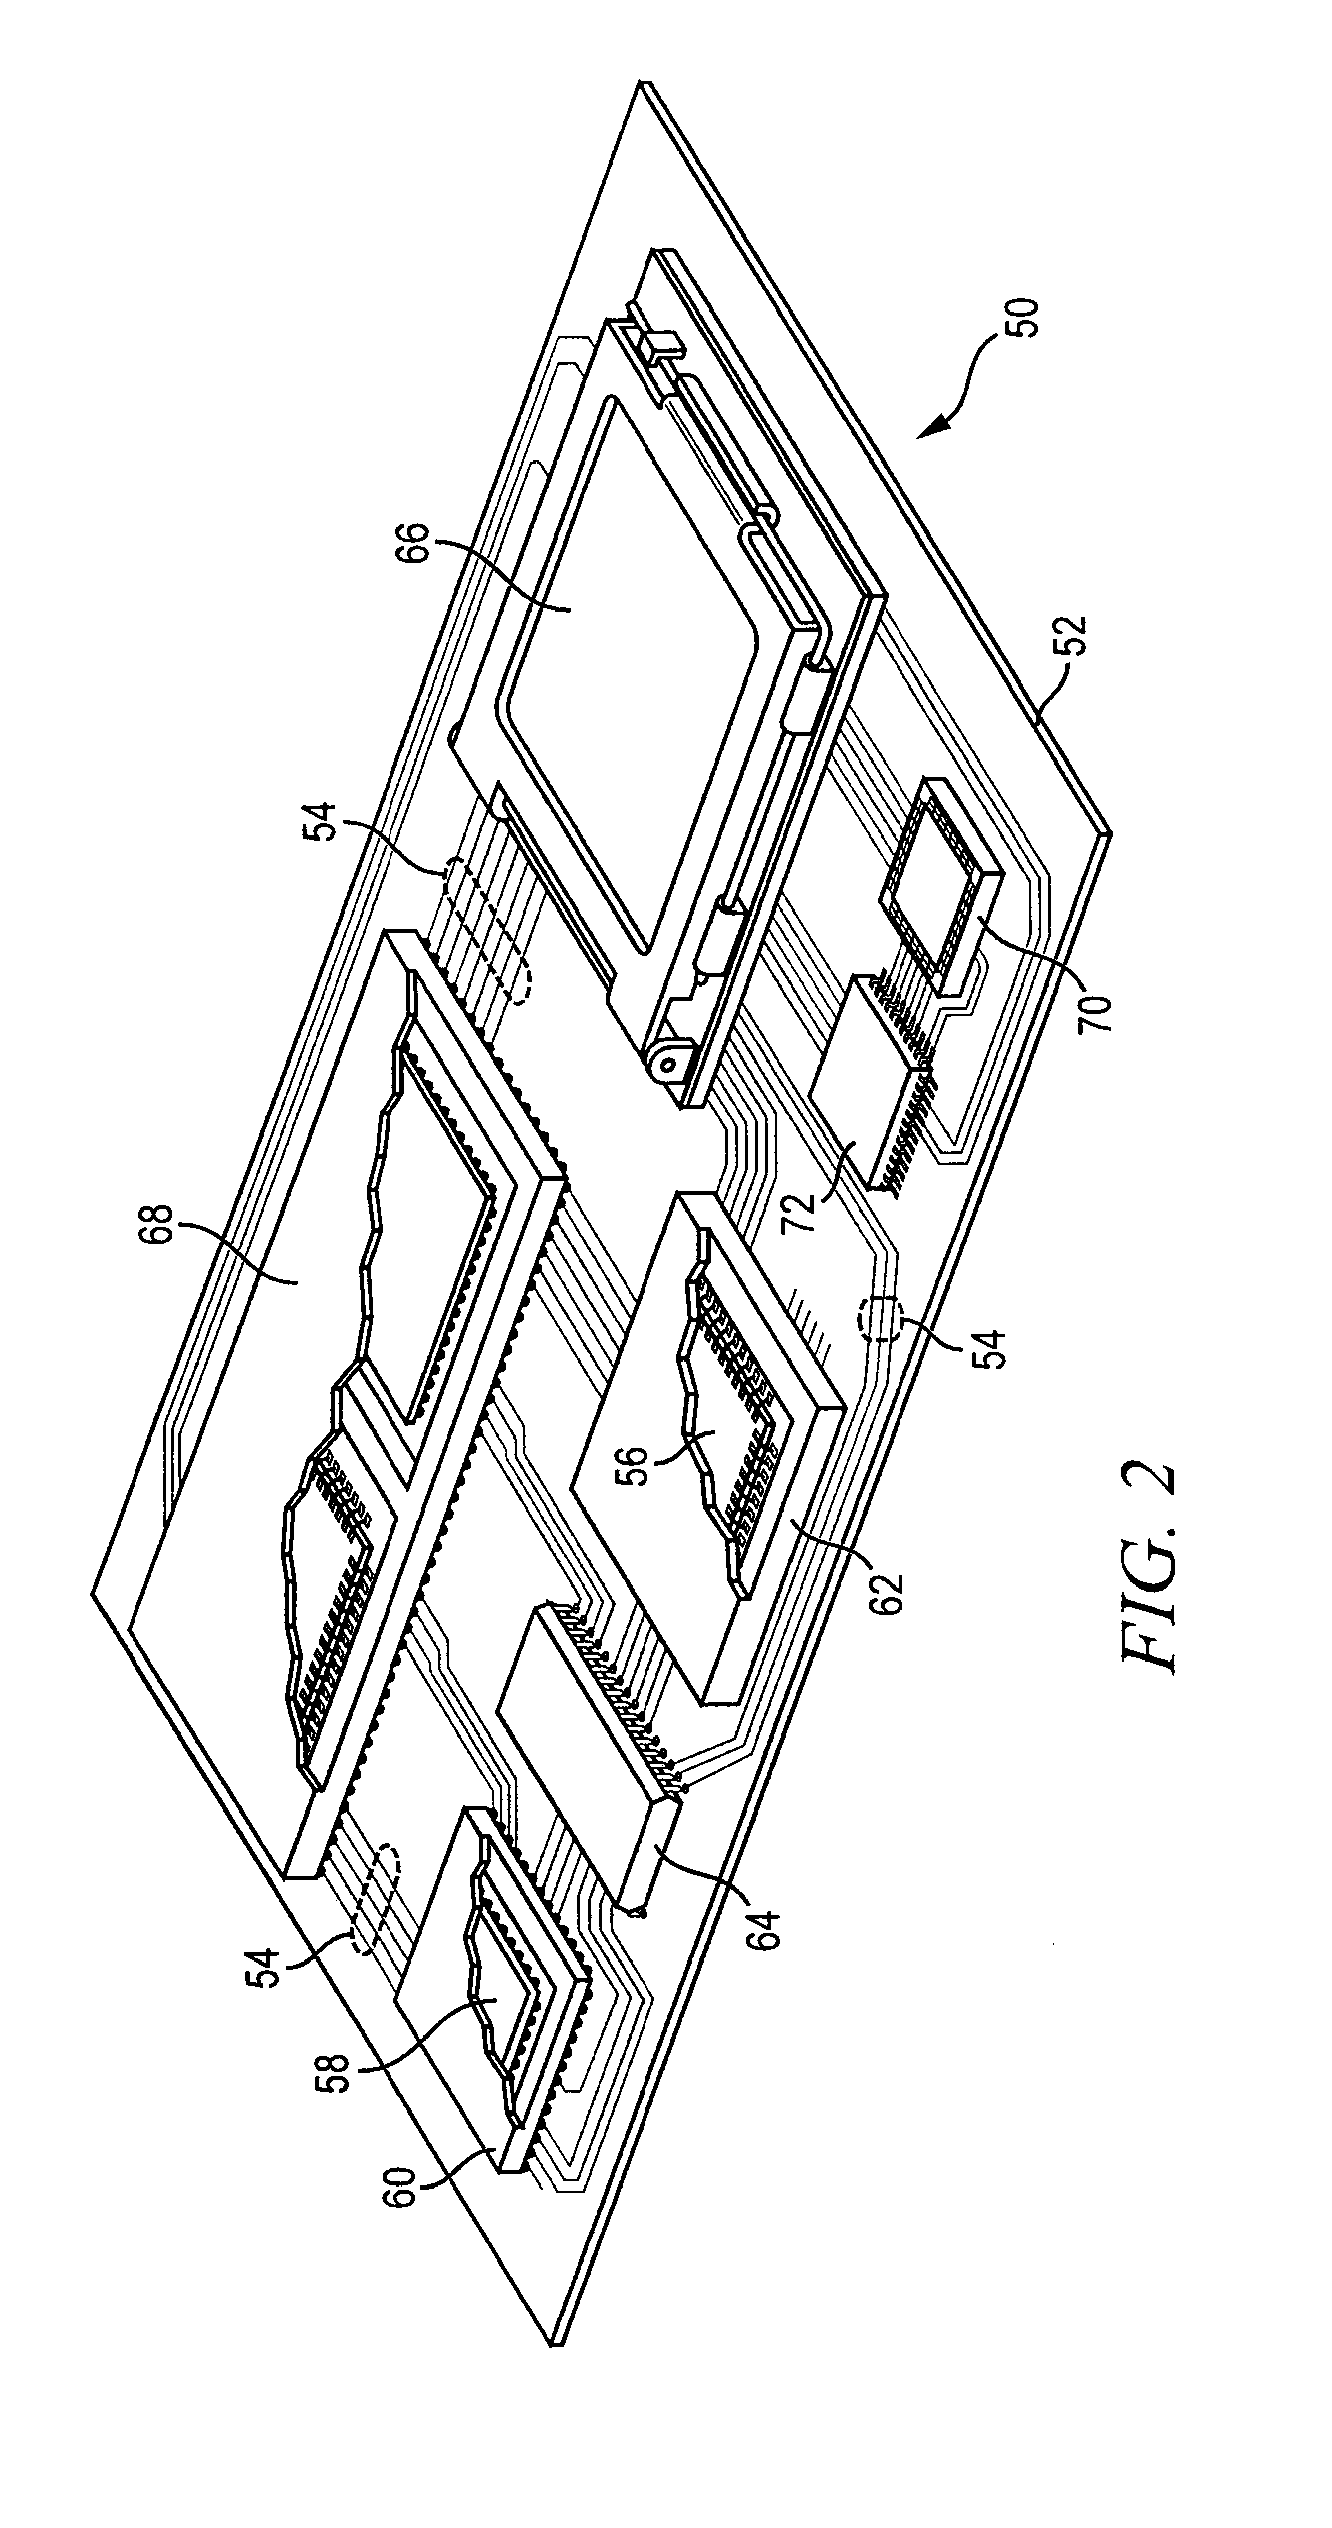 Semiconductor Device and Method of Forming RF Balun Having Reduced Capacitive Coupling and High CMRR